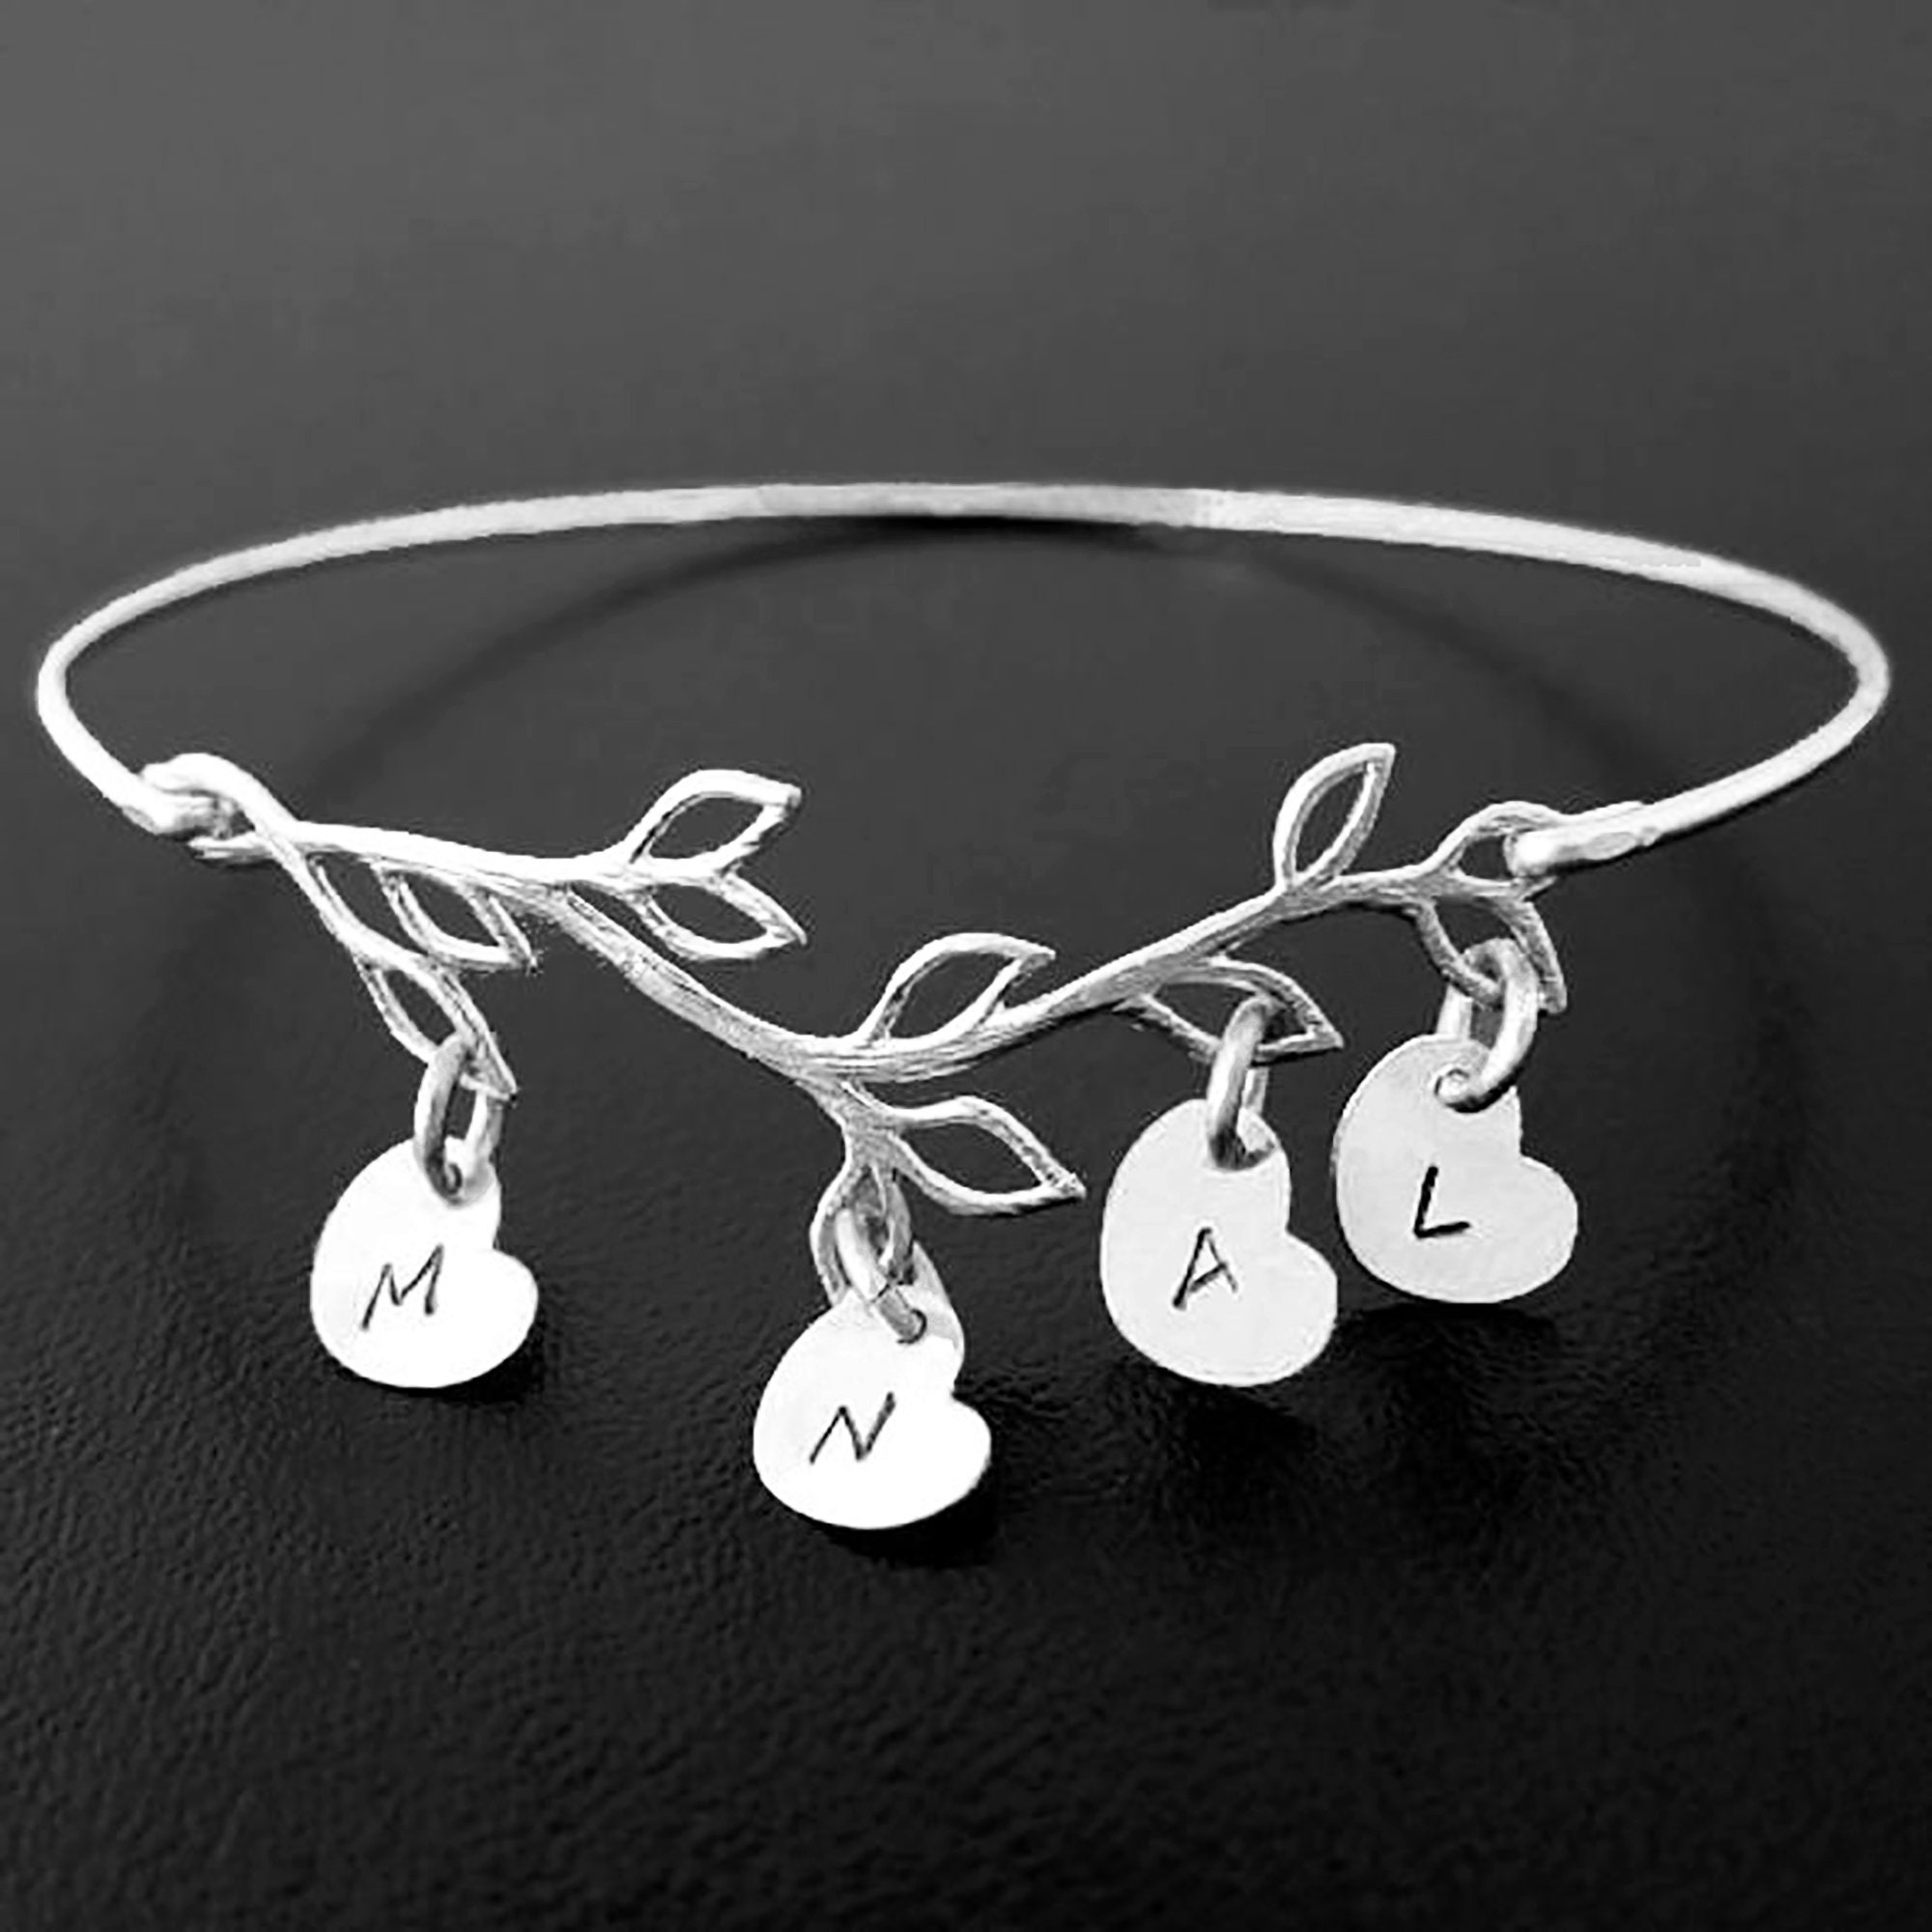 Top 5 Meaningful Gifts For Elderly Woman Who Has Everything – Leyloon  Jewelry